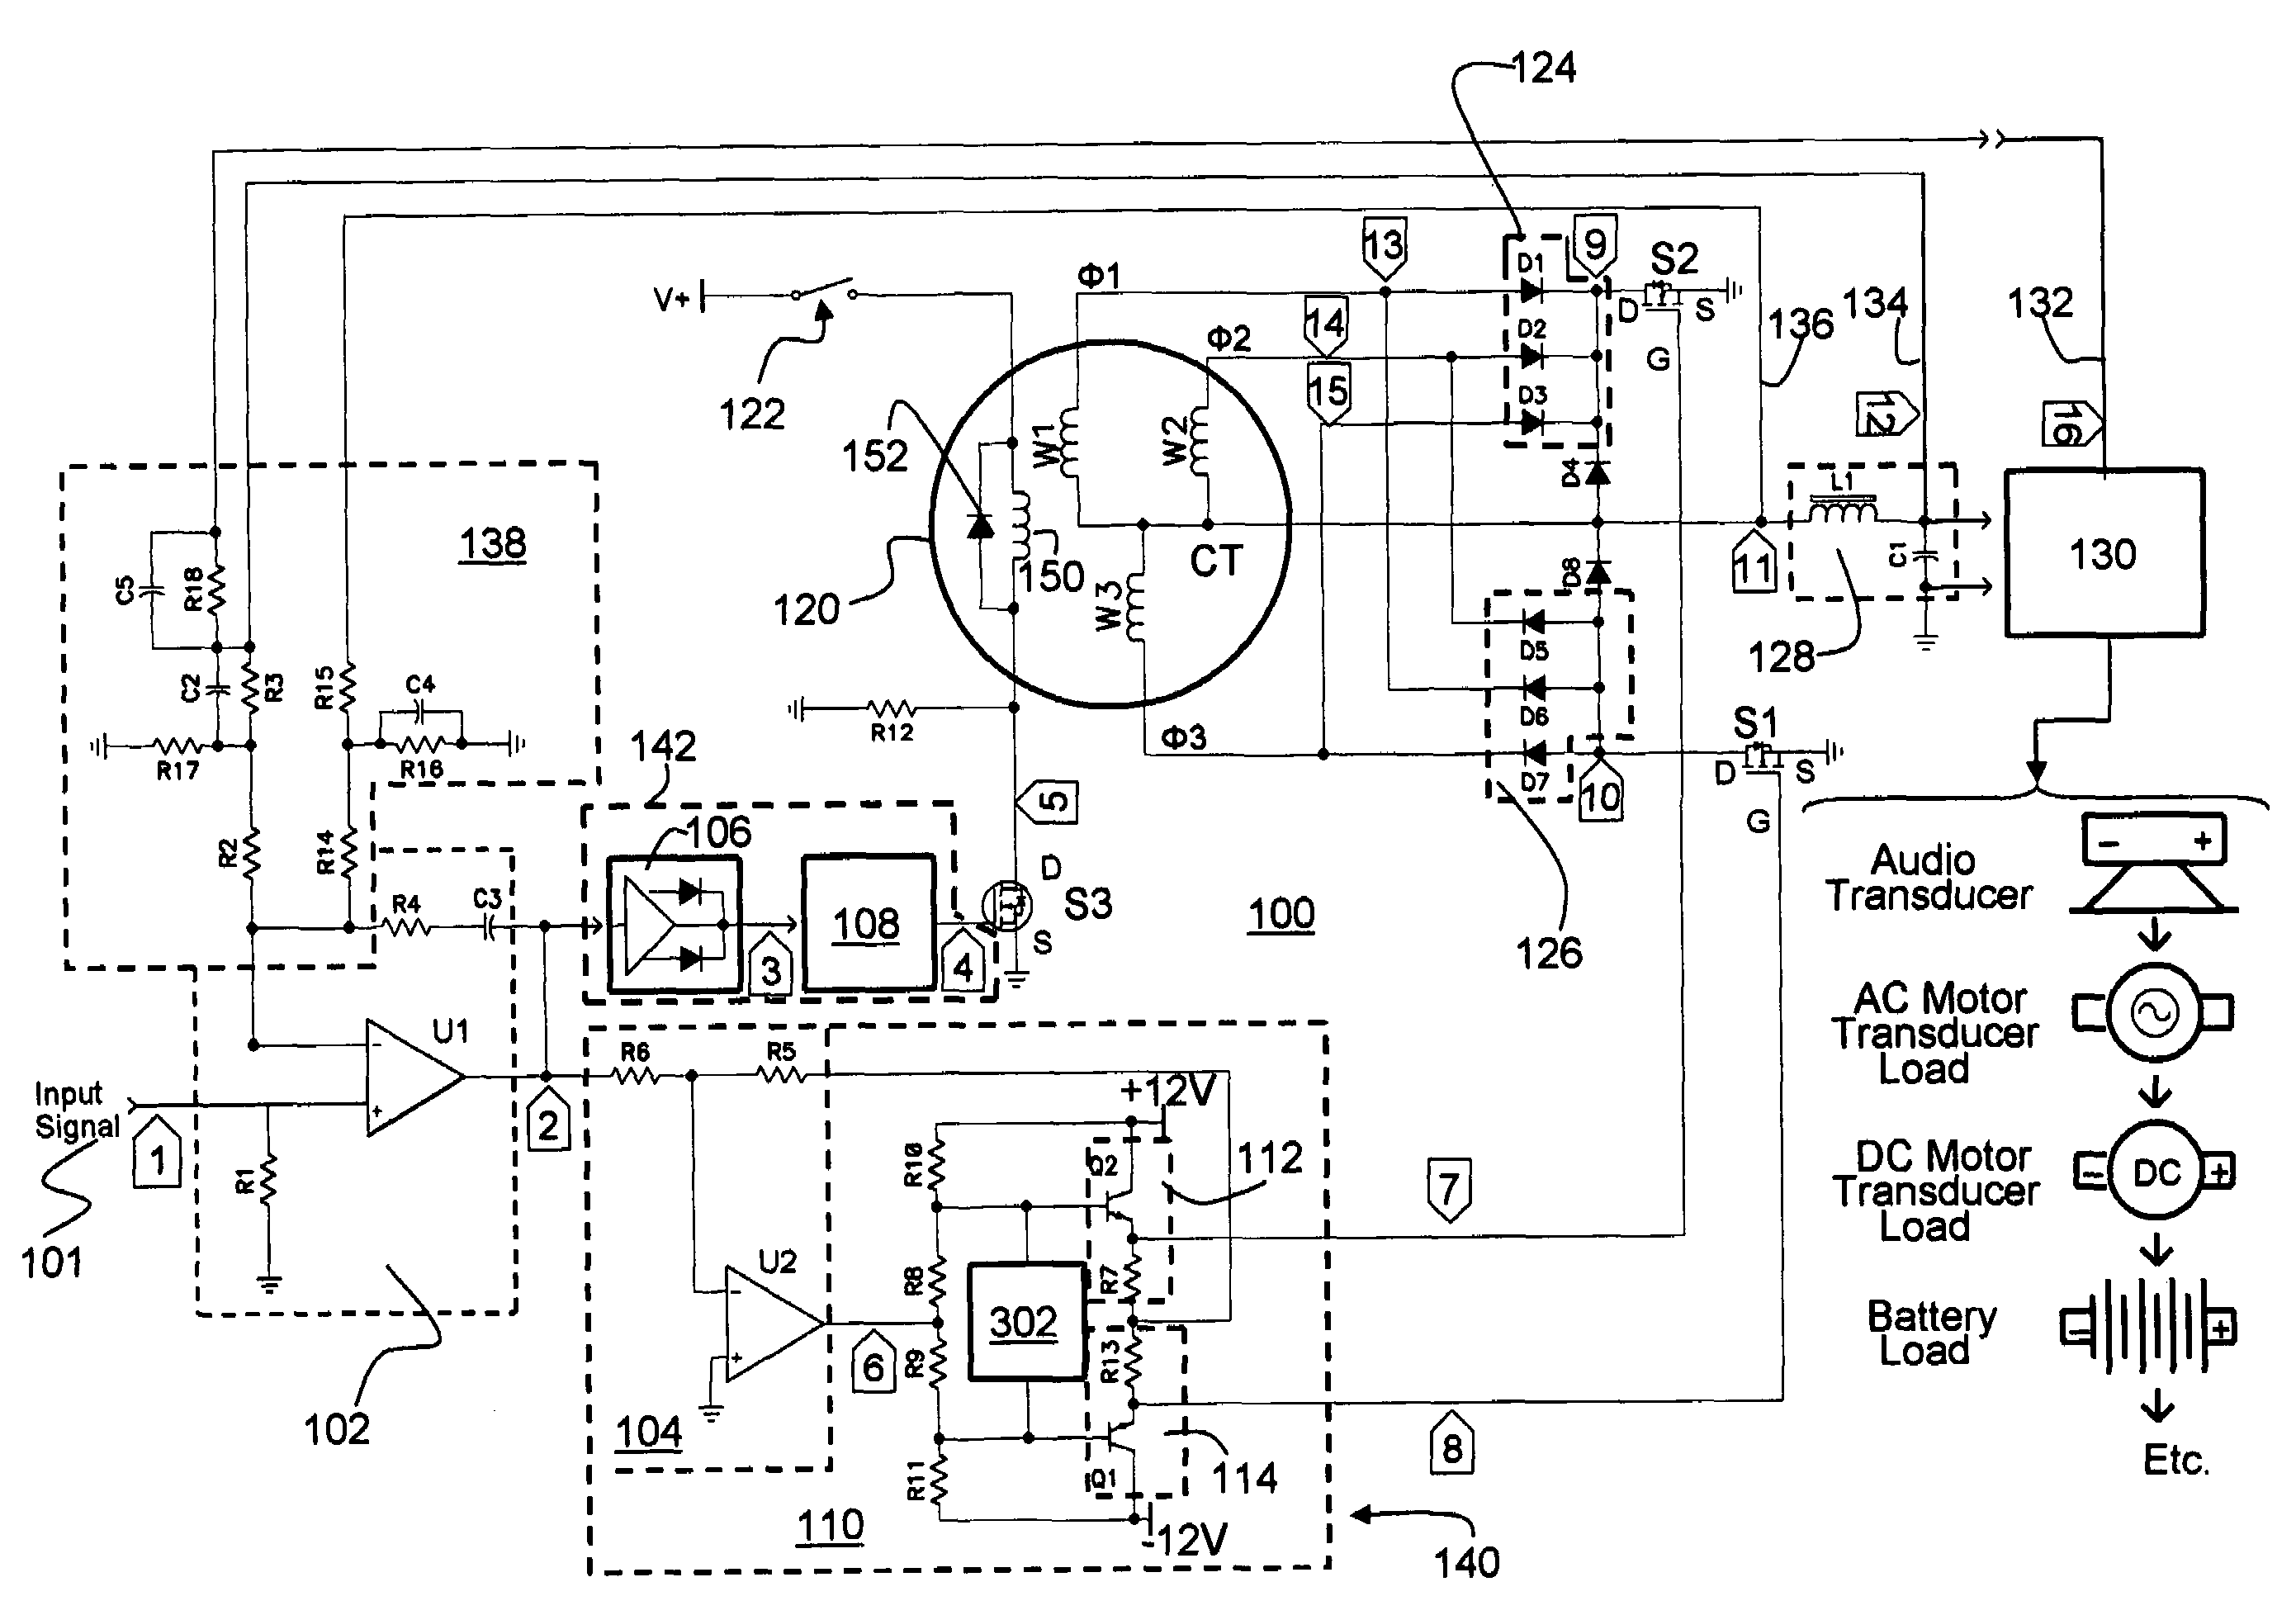 Signal amplification through an electromagnetic device